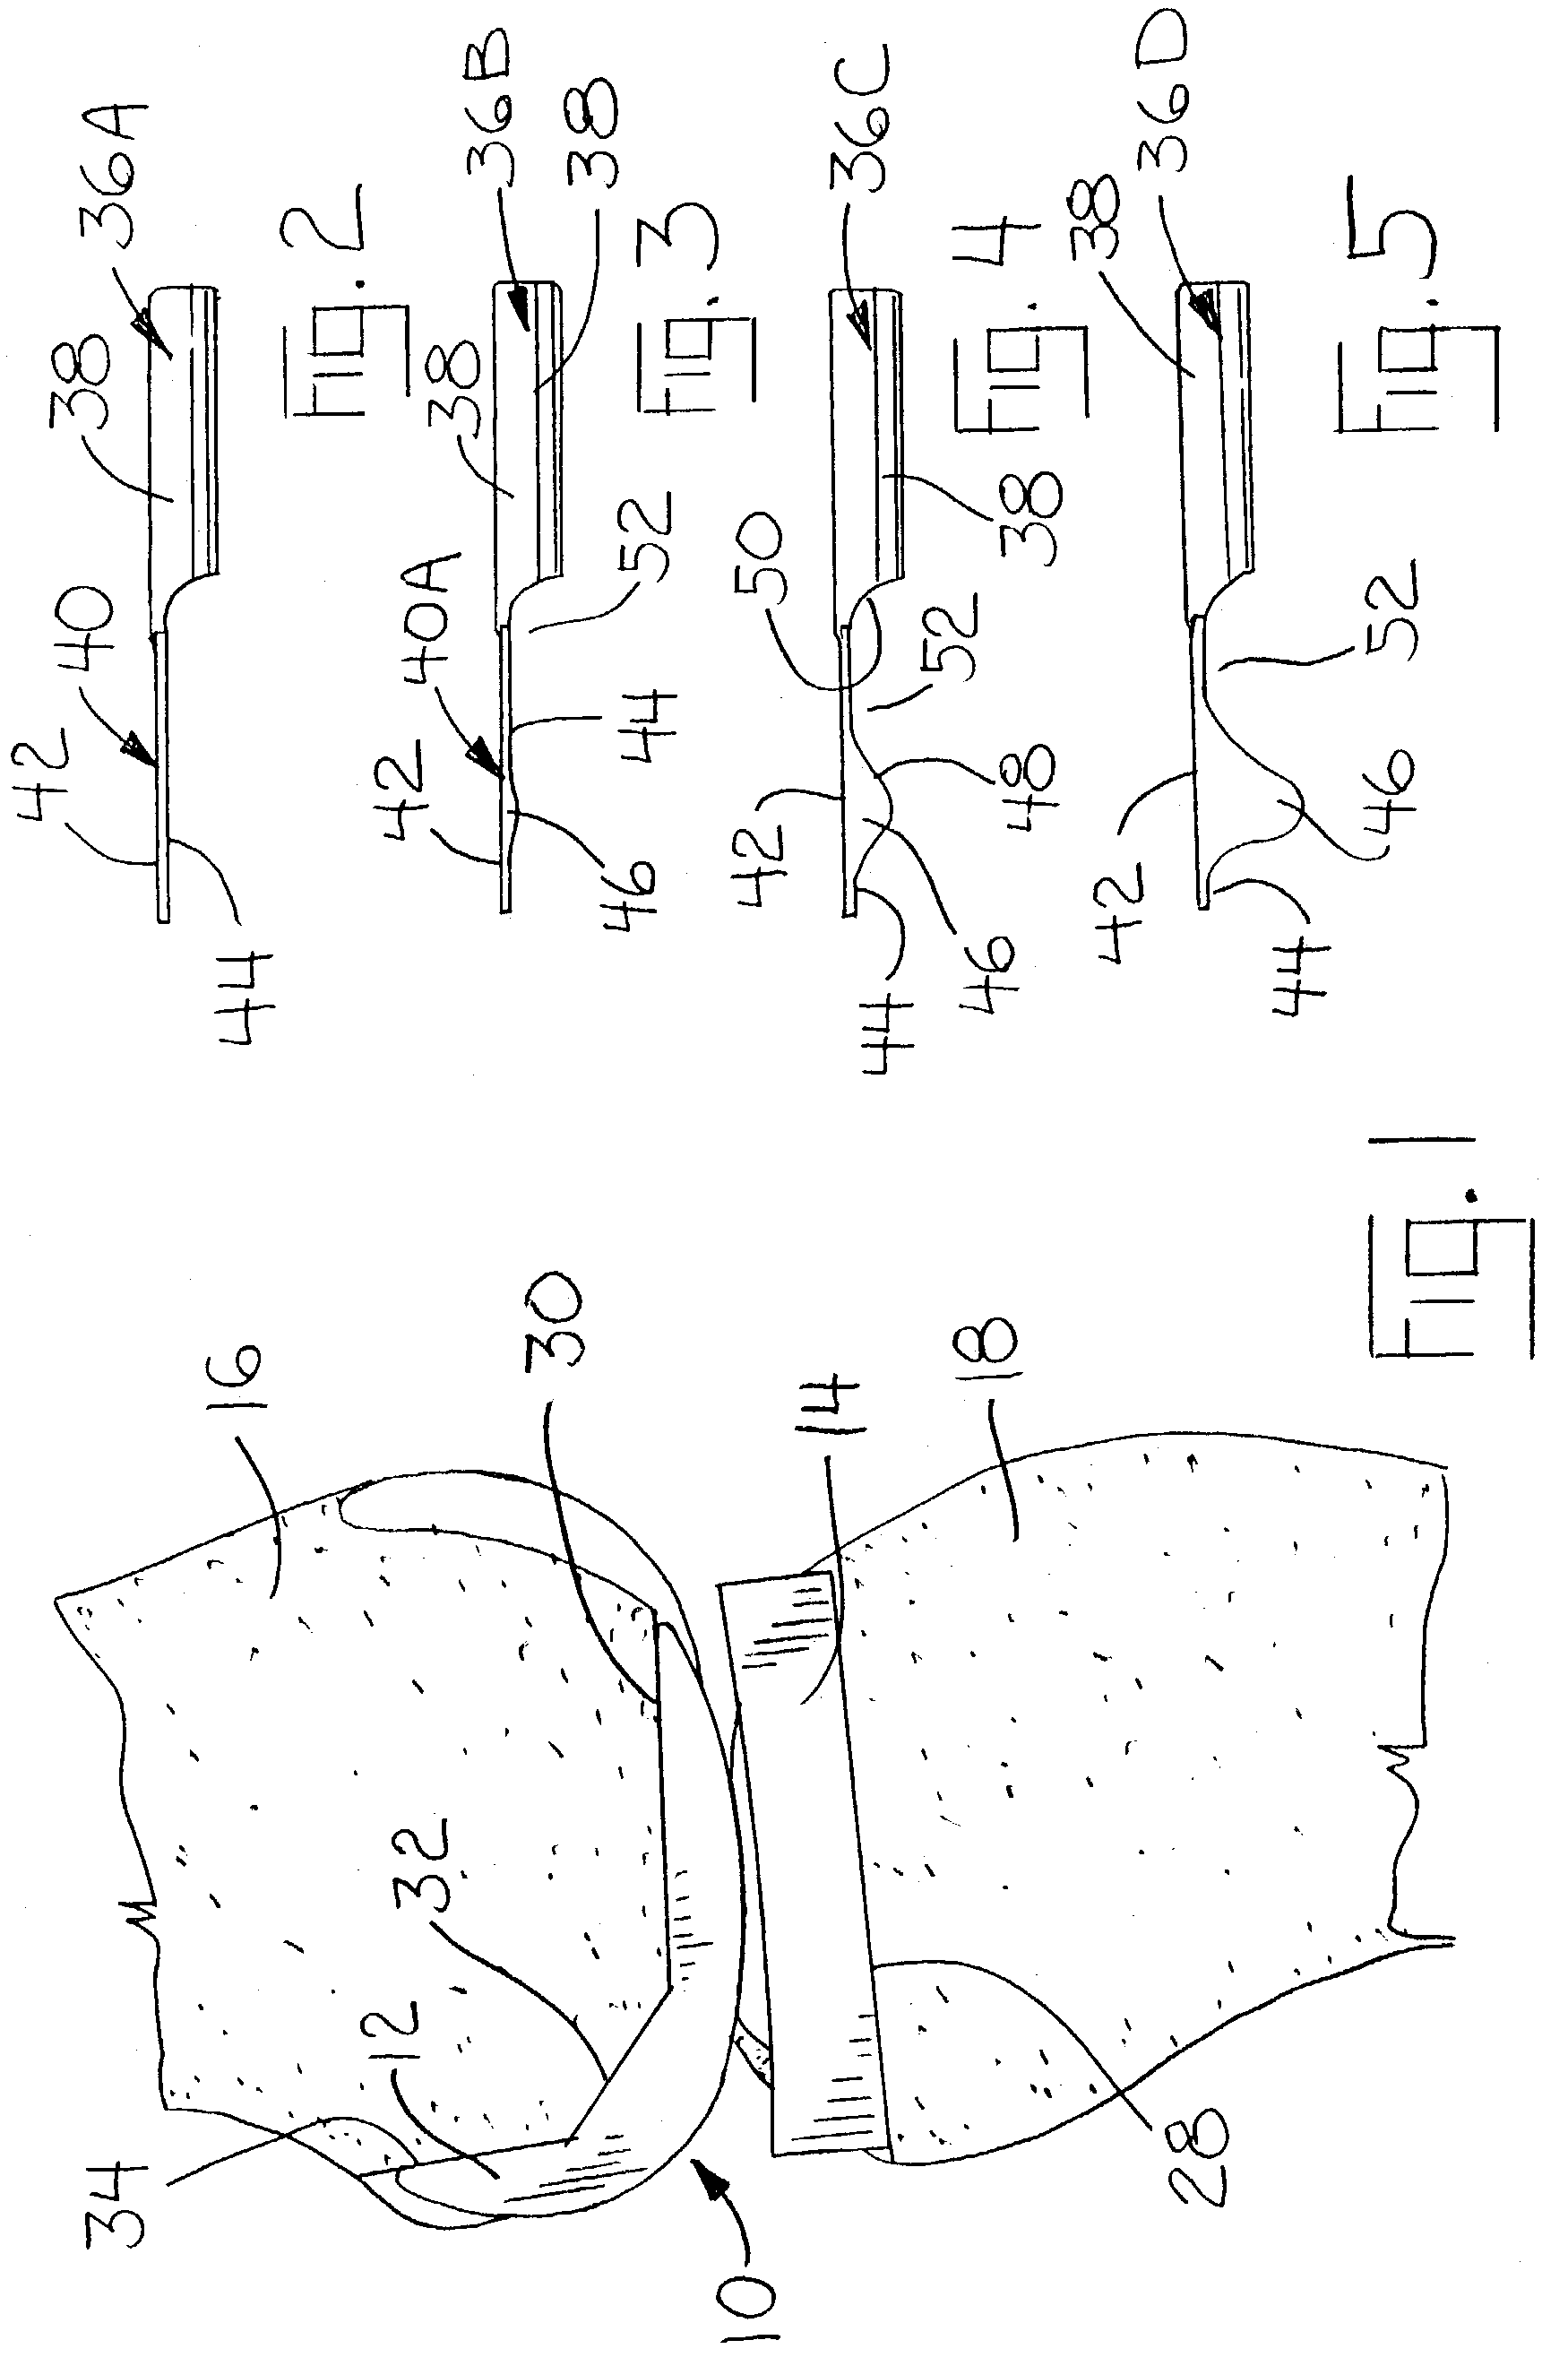 Method and apparatus for resecting a distal femur and a proximal tibia in preparation for implementing a partial knee prosthesis